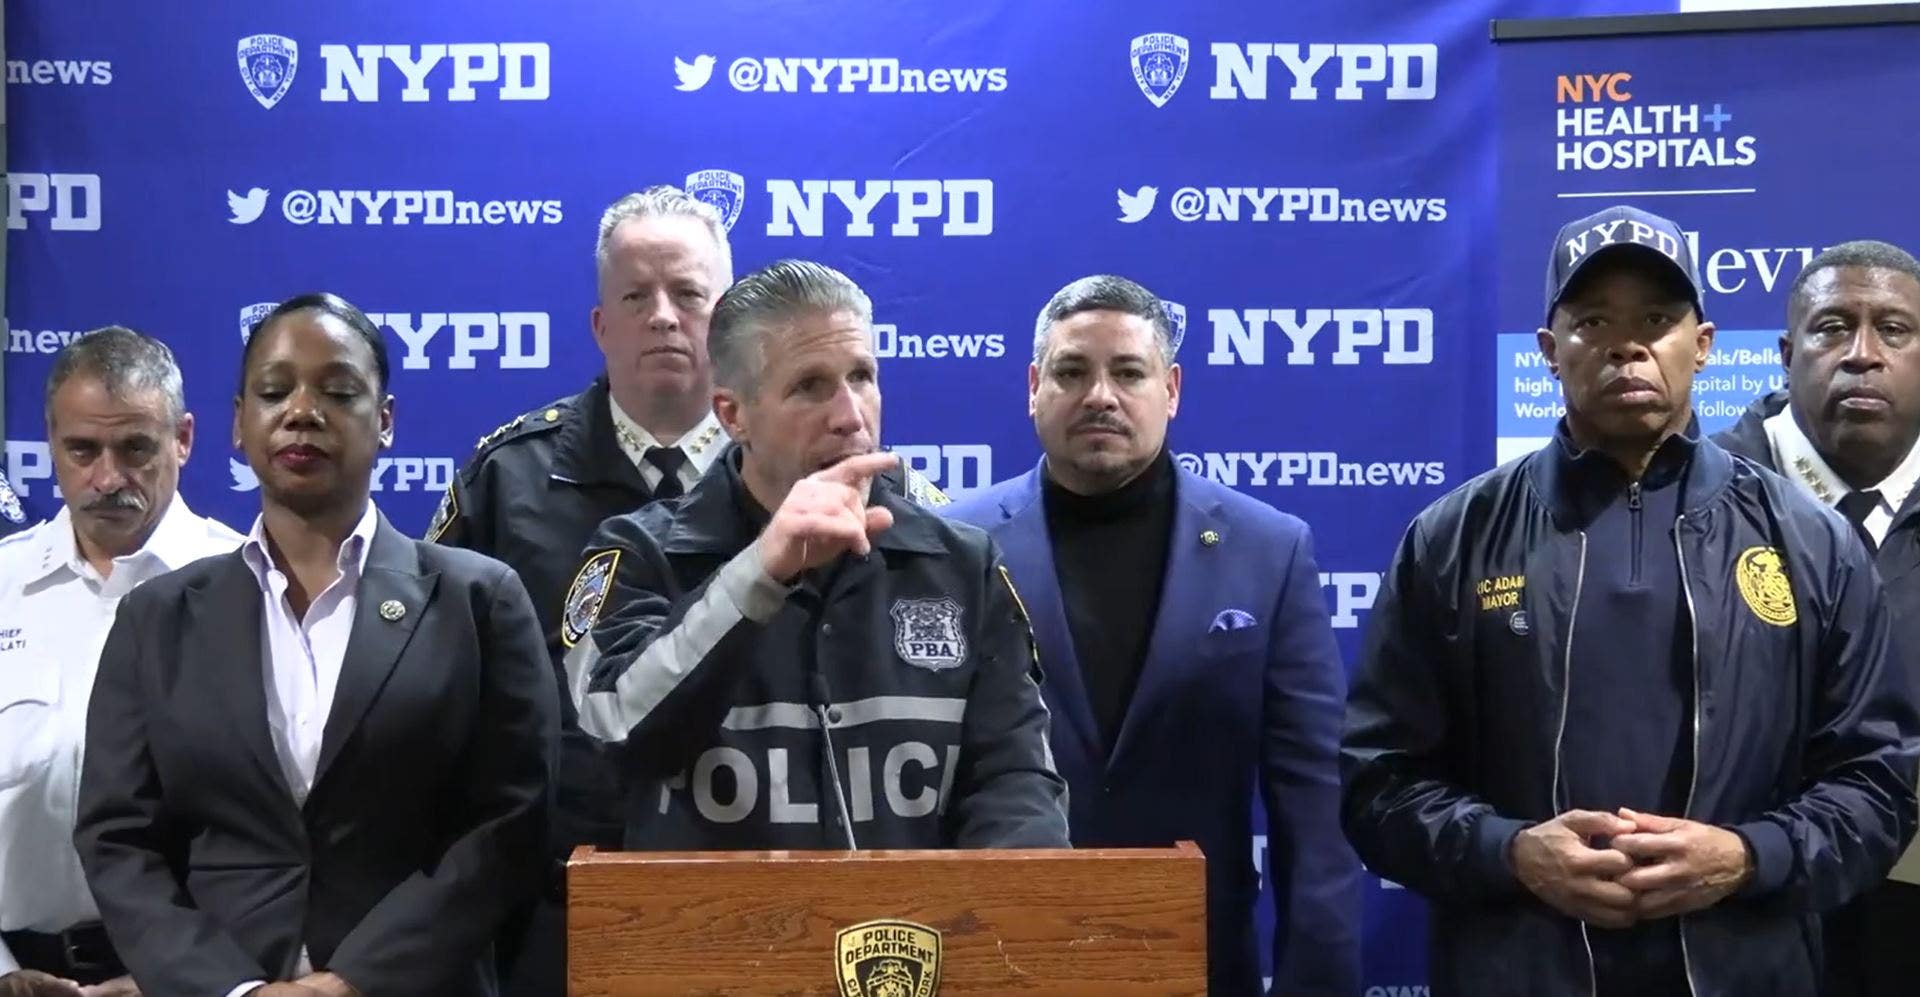 News :Suspect in NYC police stabbing may have Islamic extremist ties